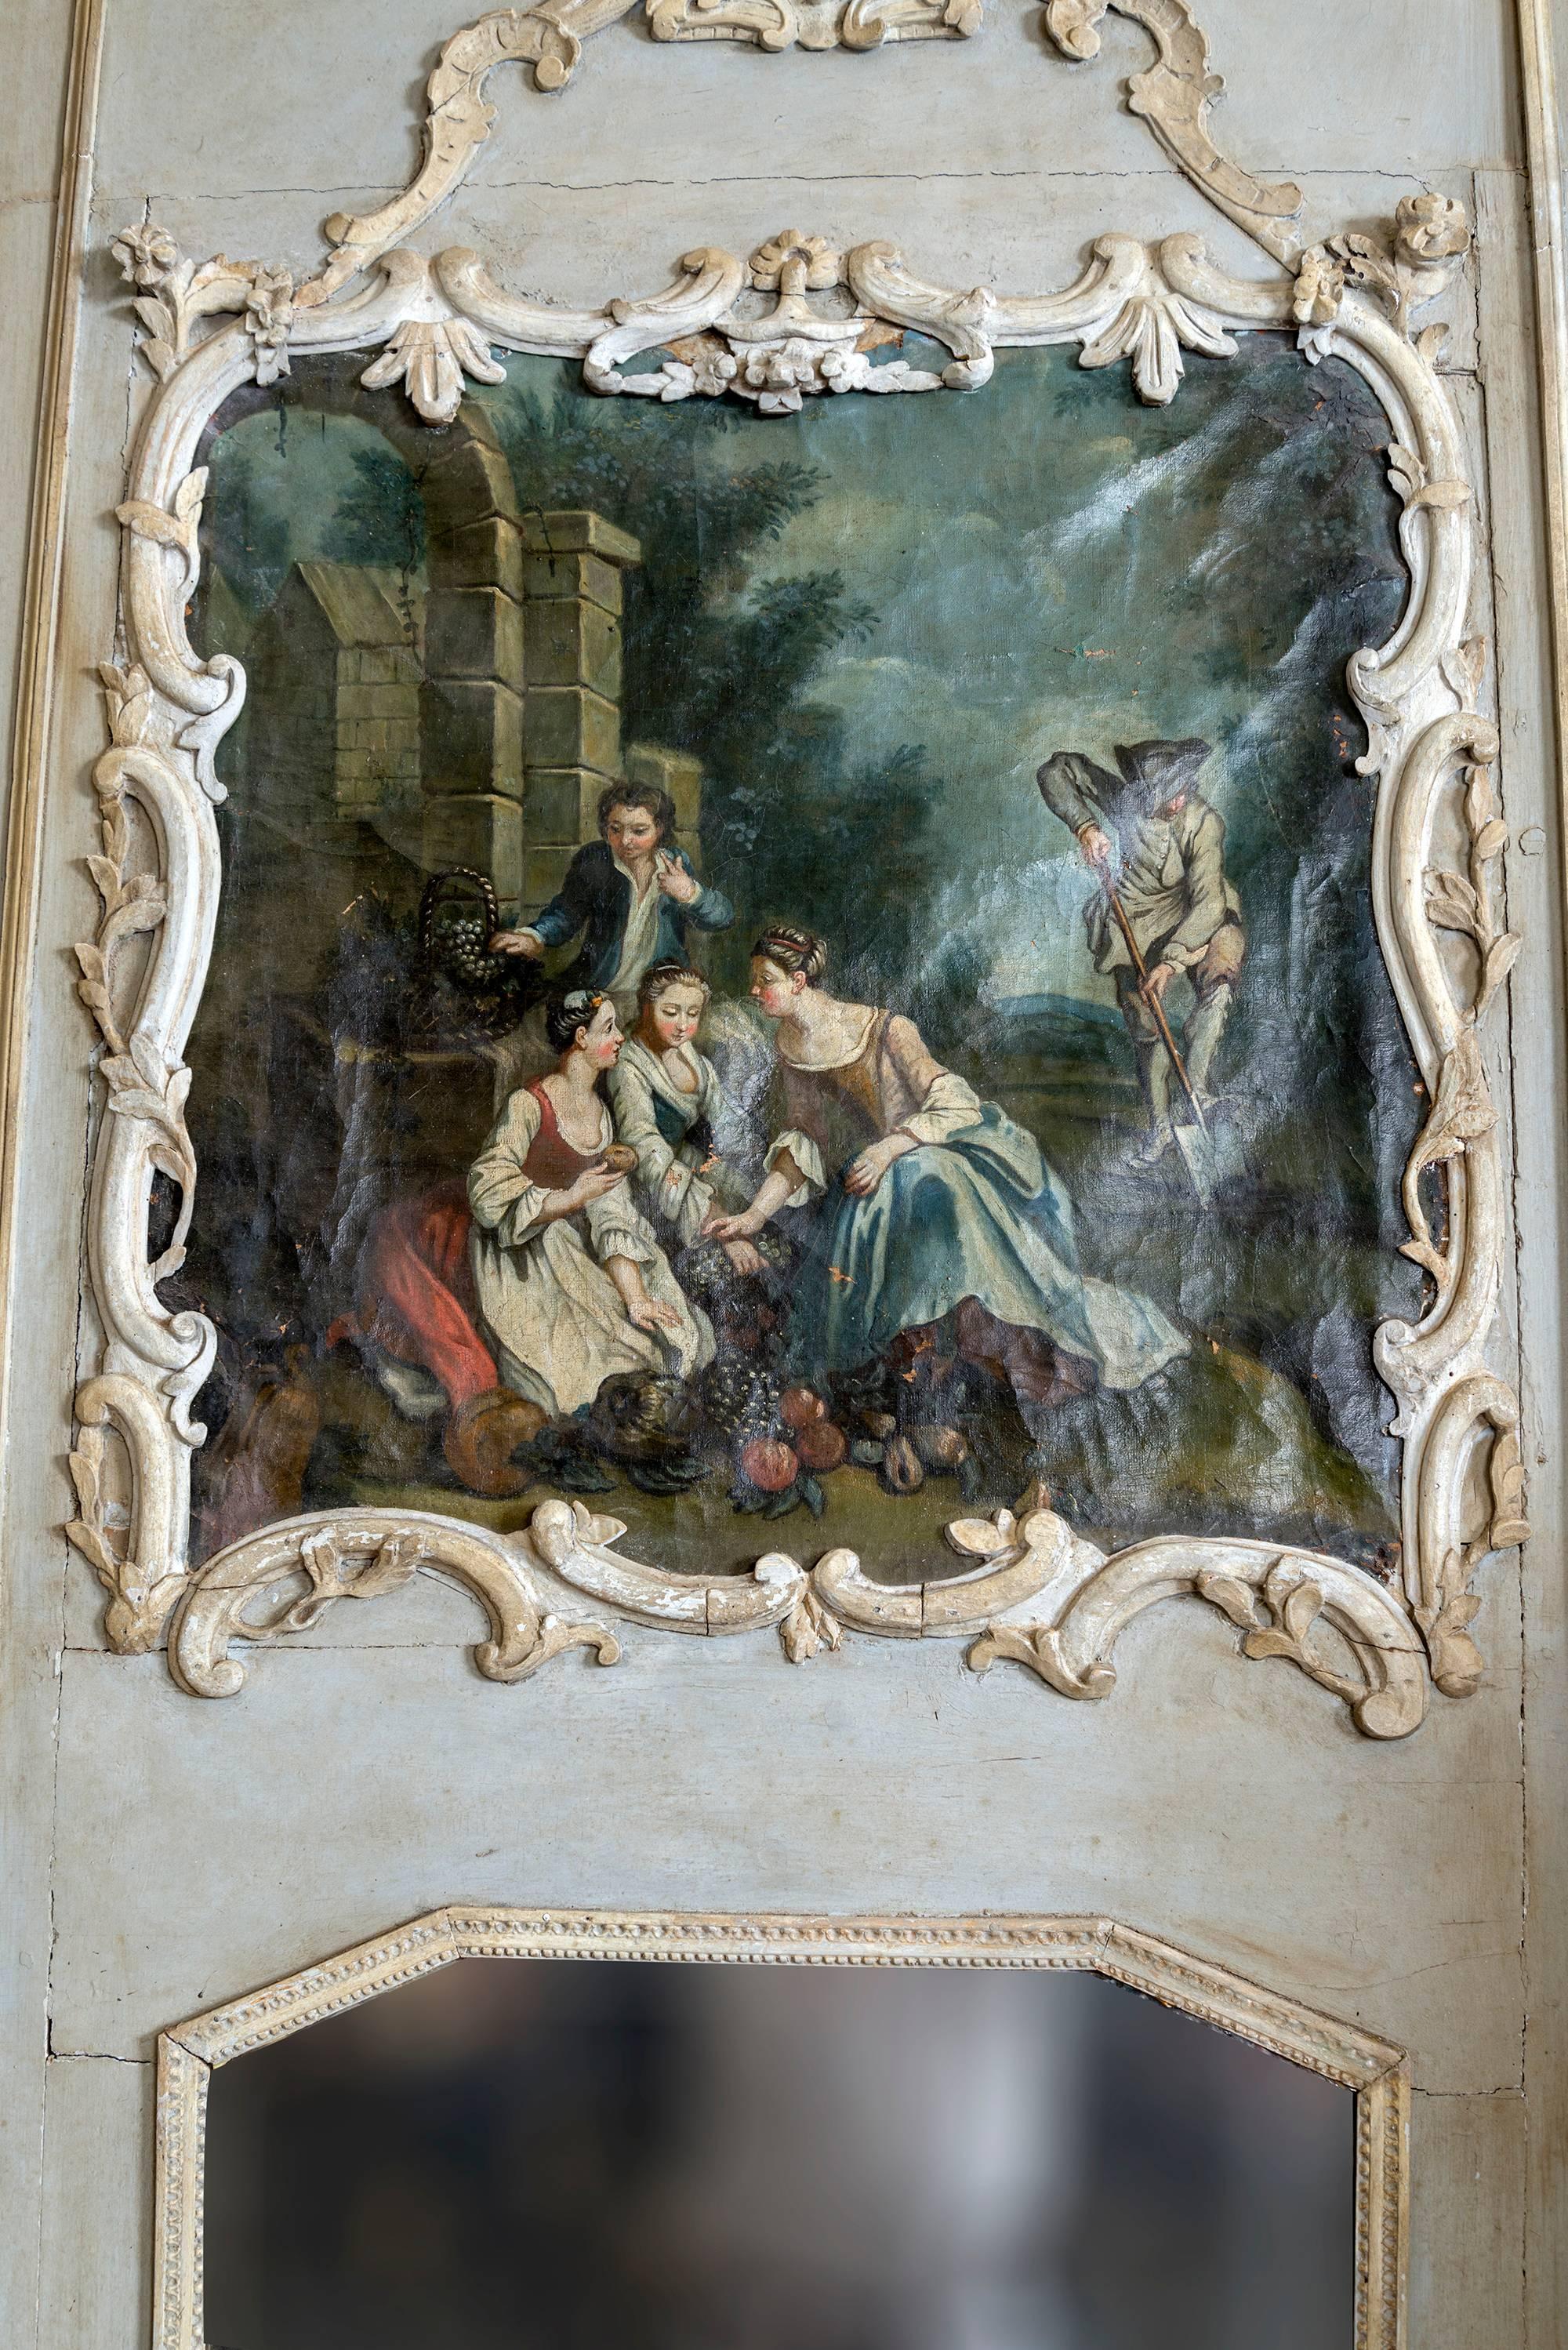 French, circa 1760
A blue painted Louis XV trumeau mirror with beautiful painting at the top.